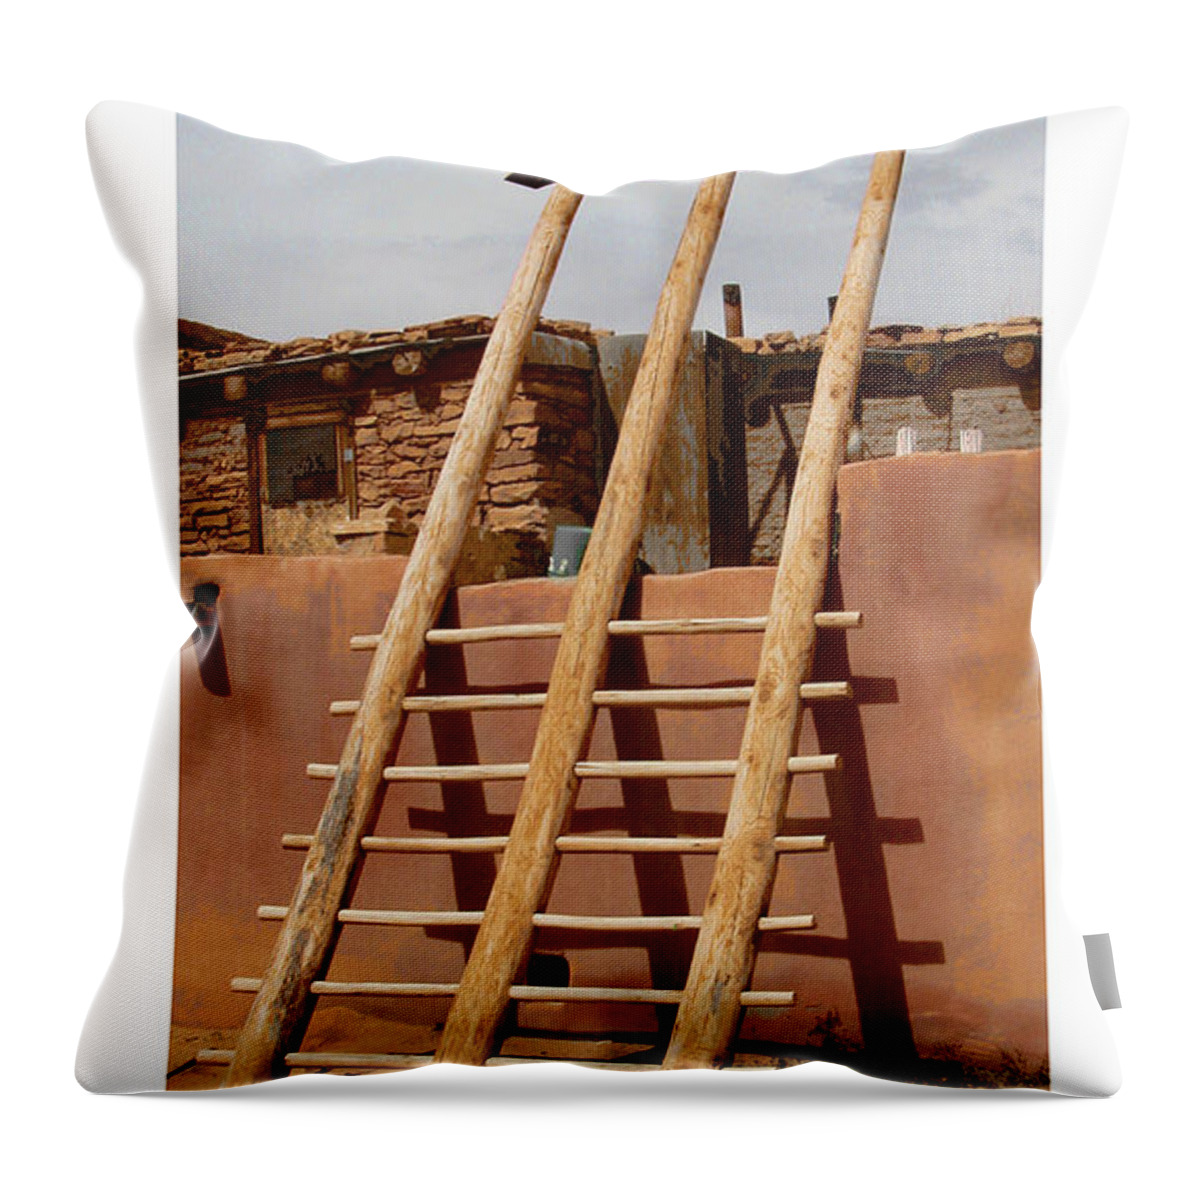 Native Americans Throw Pillow featuring the photograph Acoma Ladder by R Thomas Berner